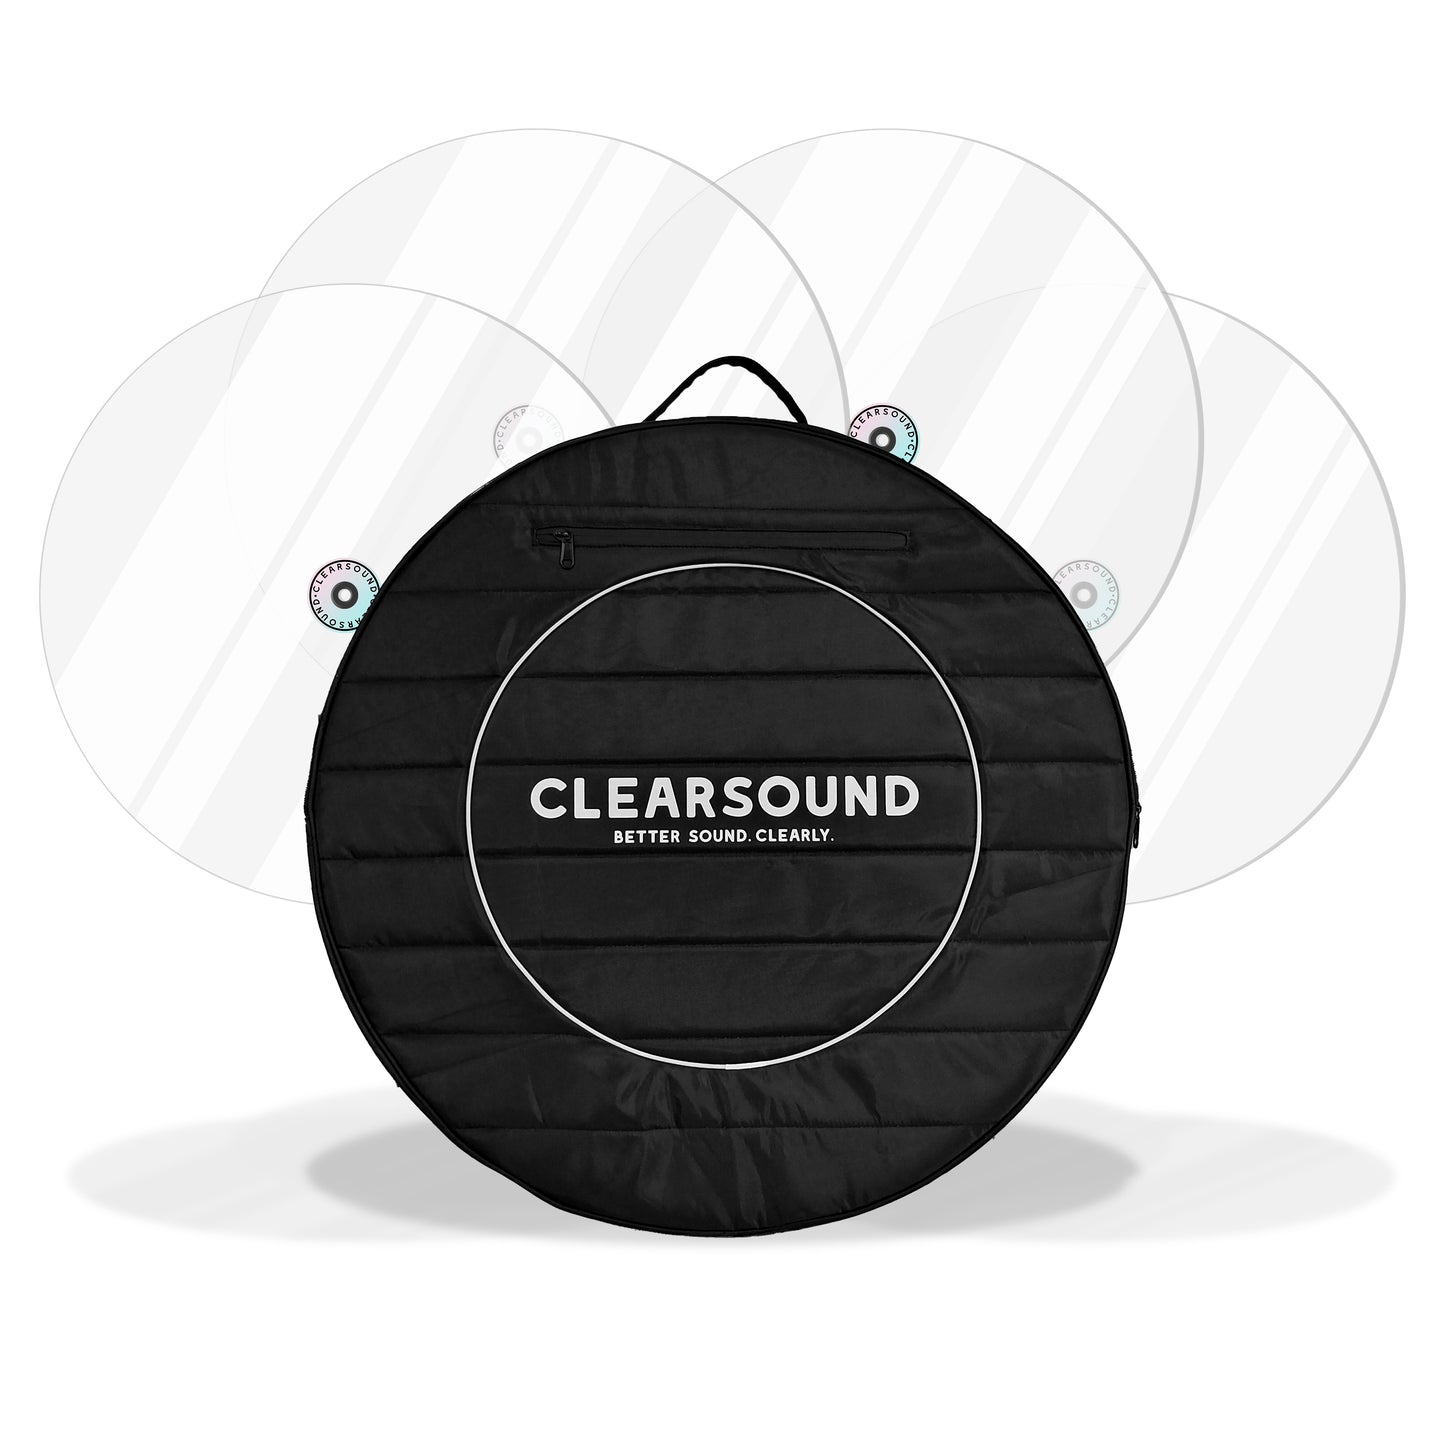 The Clearsound Professional